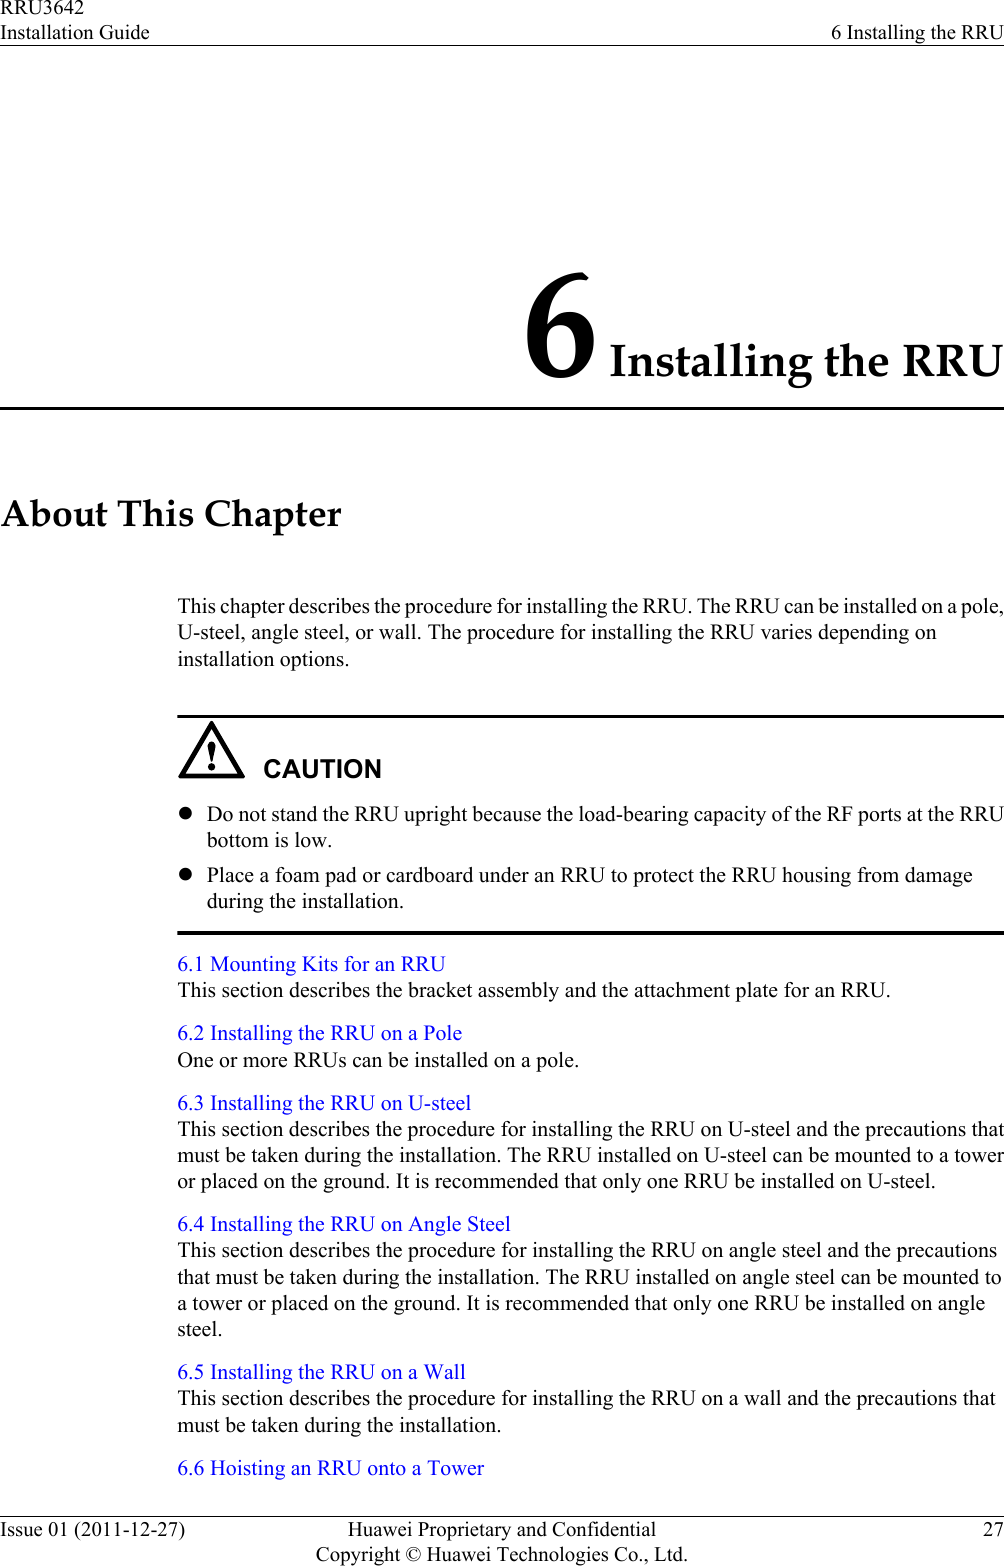 6 Installing the RRUAbout This ChapterThis chapter describes the procedure for installing the RRU. The RRU can be installed on a pole,U-steel, angle steel, or wall. The procedure for installing the RRU varies depending oninstallation options.CAUTIONlDo not stand the RRU upright because the load-bearing capacity of the RF ports at the RRUbottom is low.lPlace a foam pad or cardboard under an RRU to protect the RRU housing from damageduring the installation.6.1 Mounting Kits for an RRUThis section describes the bracket assembly and the attachment plate for an RRU.6.2 Installing the RRU on a PoleOne or more RRUs can be installed on a pole.6.3 Installing the RRU on U-steelThis section describes the procedure for installing the RRU on U-steel and the precautions thatmust be taken during the installation. The RRU installed on U-steel can be mounted to a toweror placed on the ground. It is recommended that only one RRU be installed on U-steel.6.4 Installing the RRU on Angle SteelThis section describes the procedure for installing the RRU on angle steel and the precautionsthat must be taken during the installation. The RRU installed on angle steel can be mounted toa tower or placed on the ground. It is recommended that only one RRU be installed on anglesteel.6.5 Installing the RRU on a WallThis section describes the procedure for installing the RRU on a wall and the precautions thatmust be taken during the installation.6.6 Hoisting an RRU onto a TowerRRU3642Installation Guide 6 Installing the RRUIssue 01 (2011-12-27) Huawei Proprietary and ConfidentialCopyright © Huawei Technologies Co., Ltd.27